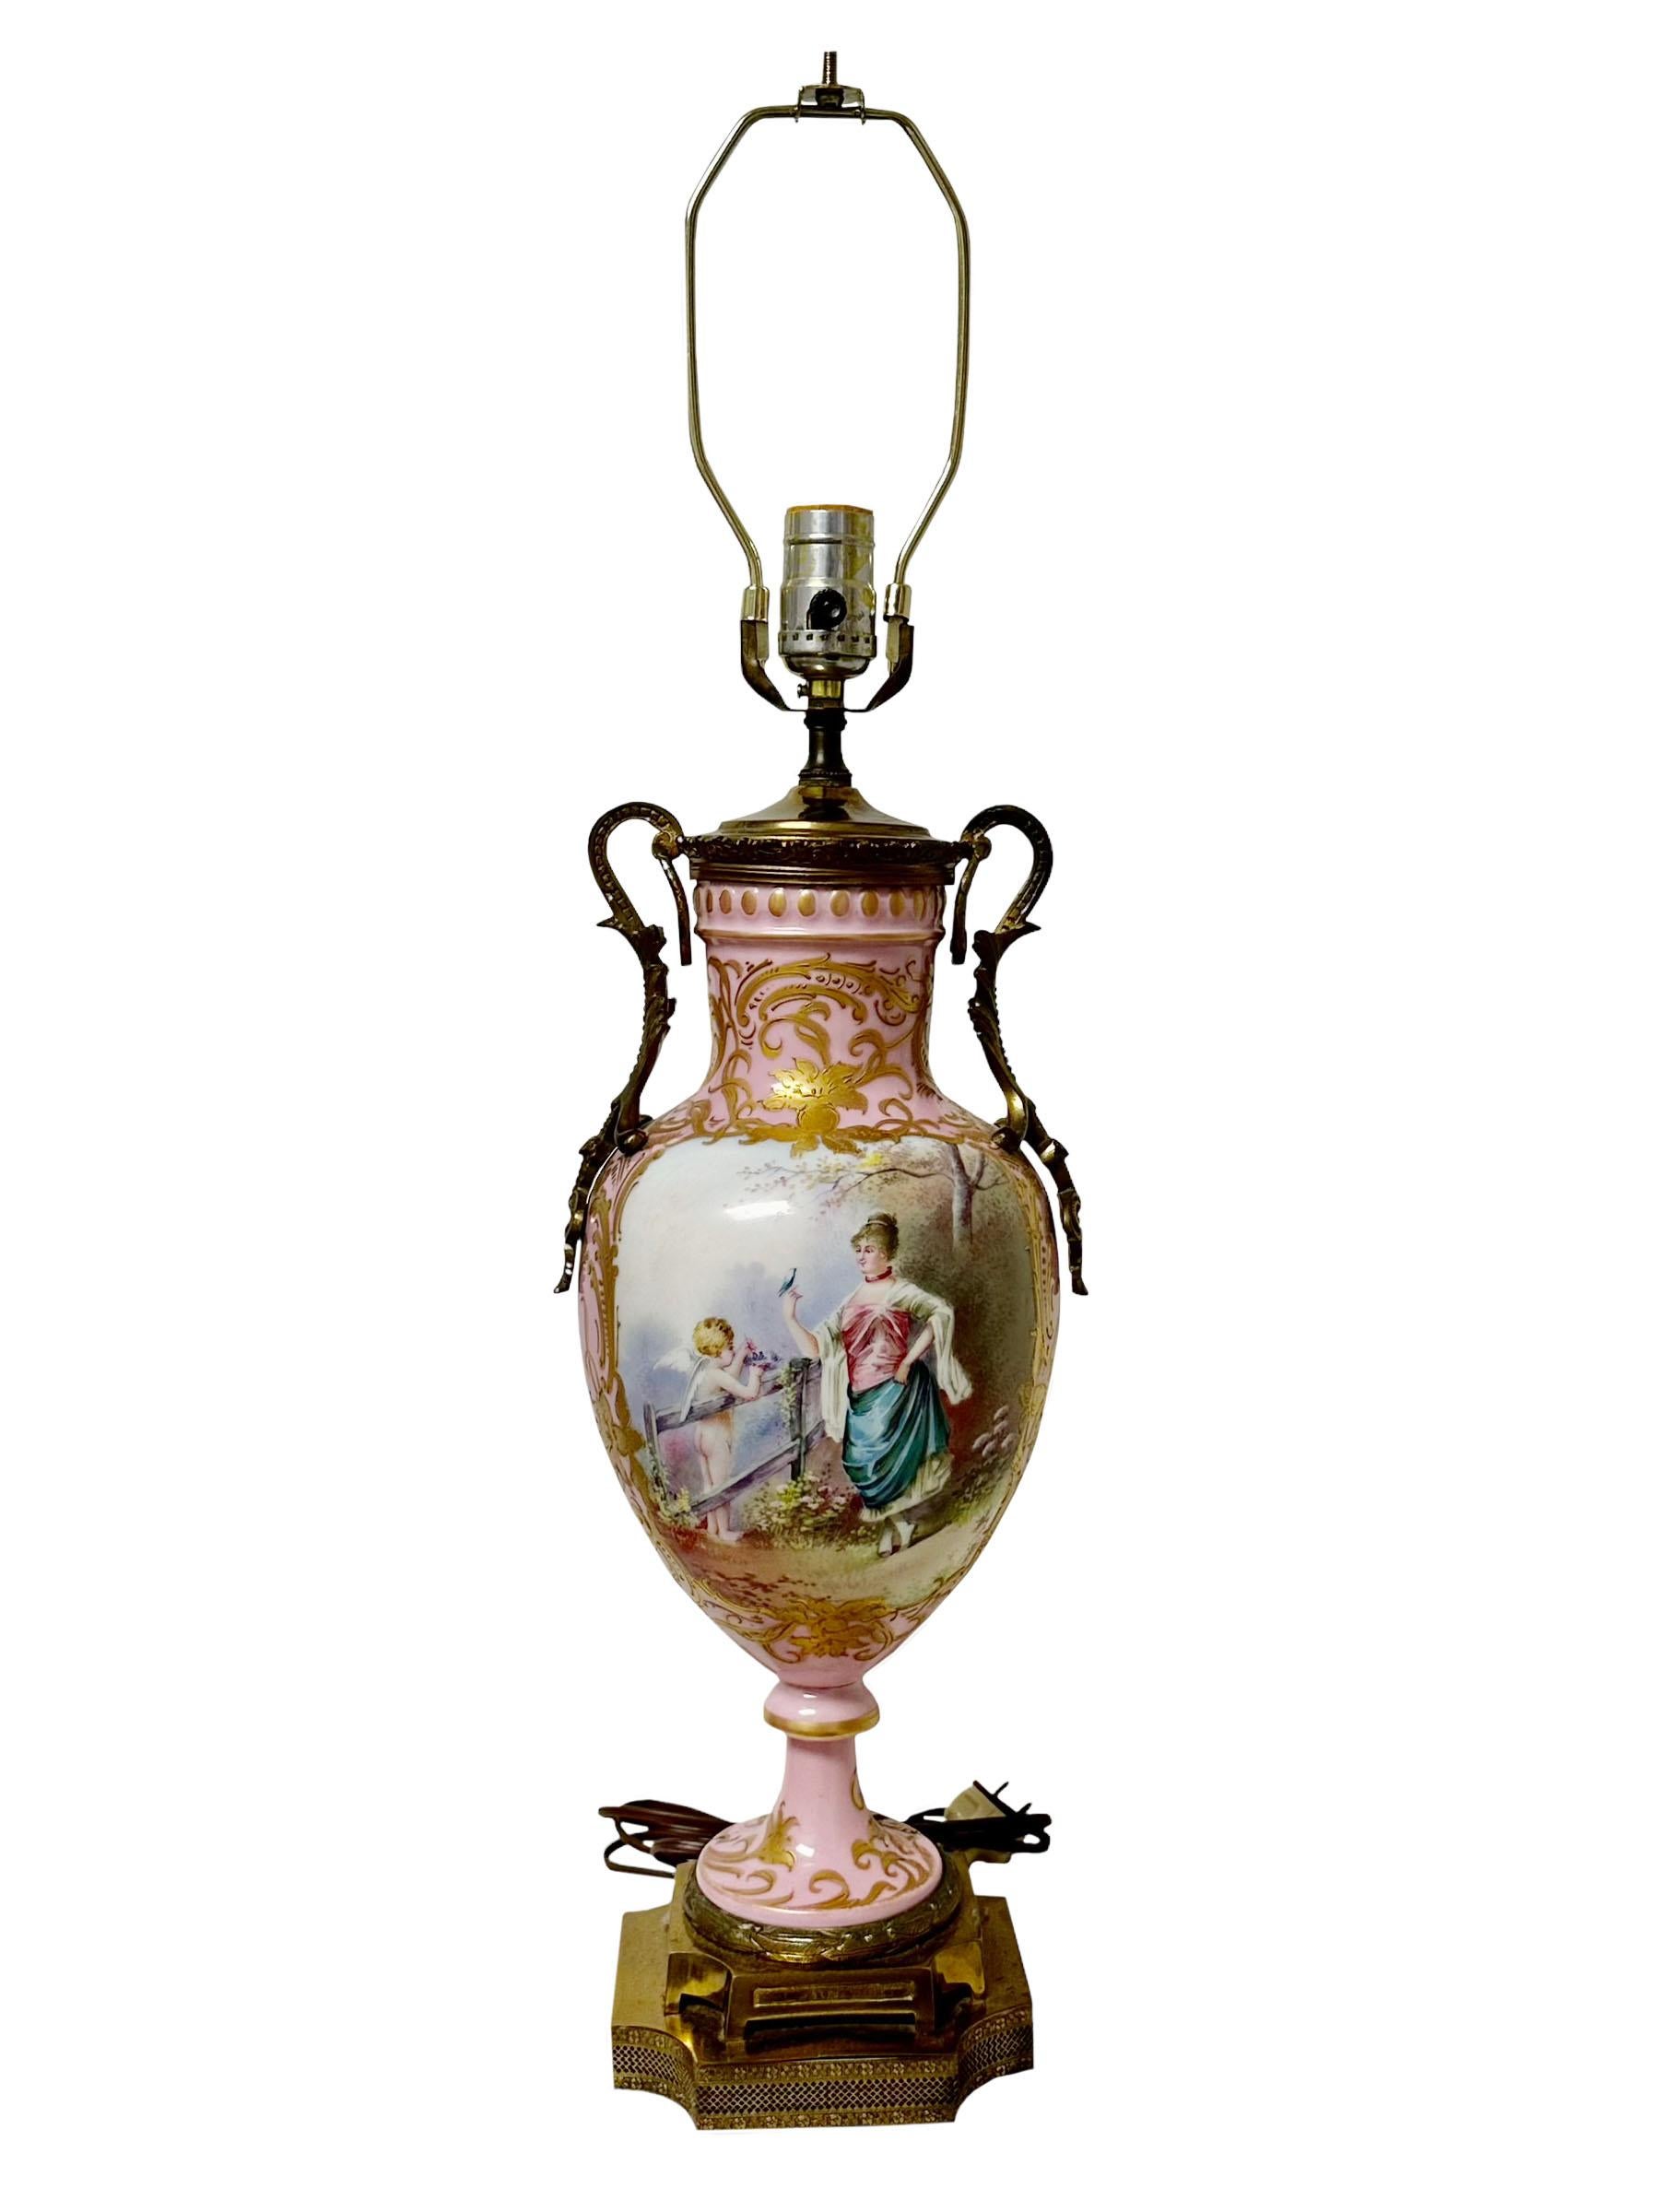 A late 19th century Sevres porcelain cast or a vase that has been converted into a lamp. It's hard to tell if it were a cast or a vase because it has an ormolu cap on it. Lamp with art nouveau flowers in the back and cut corners on the base.